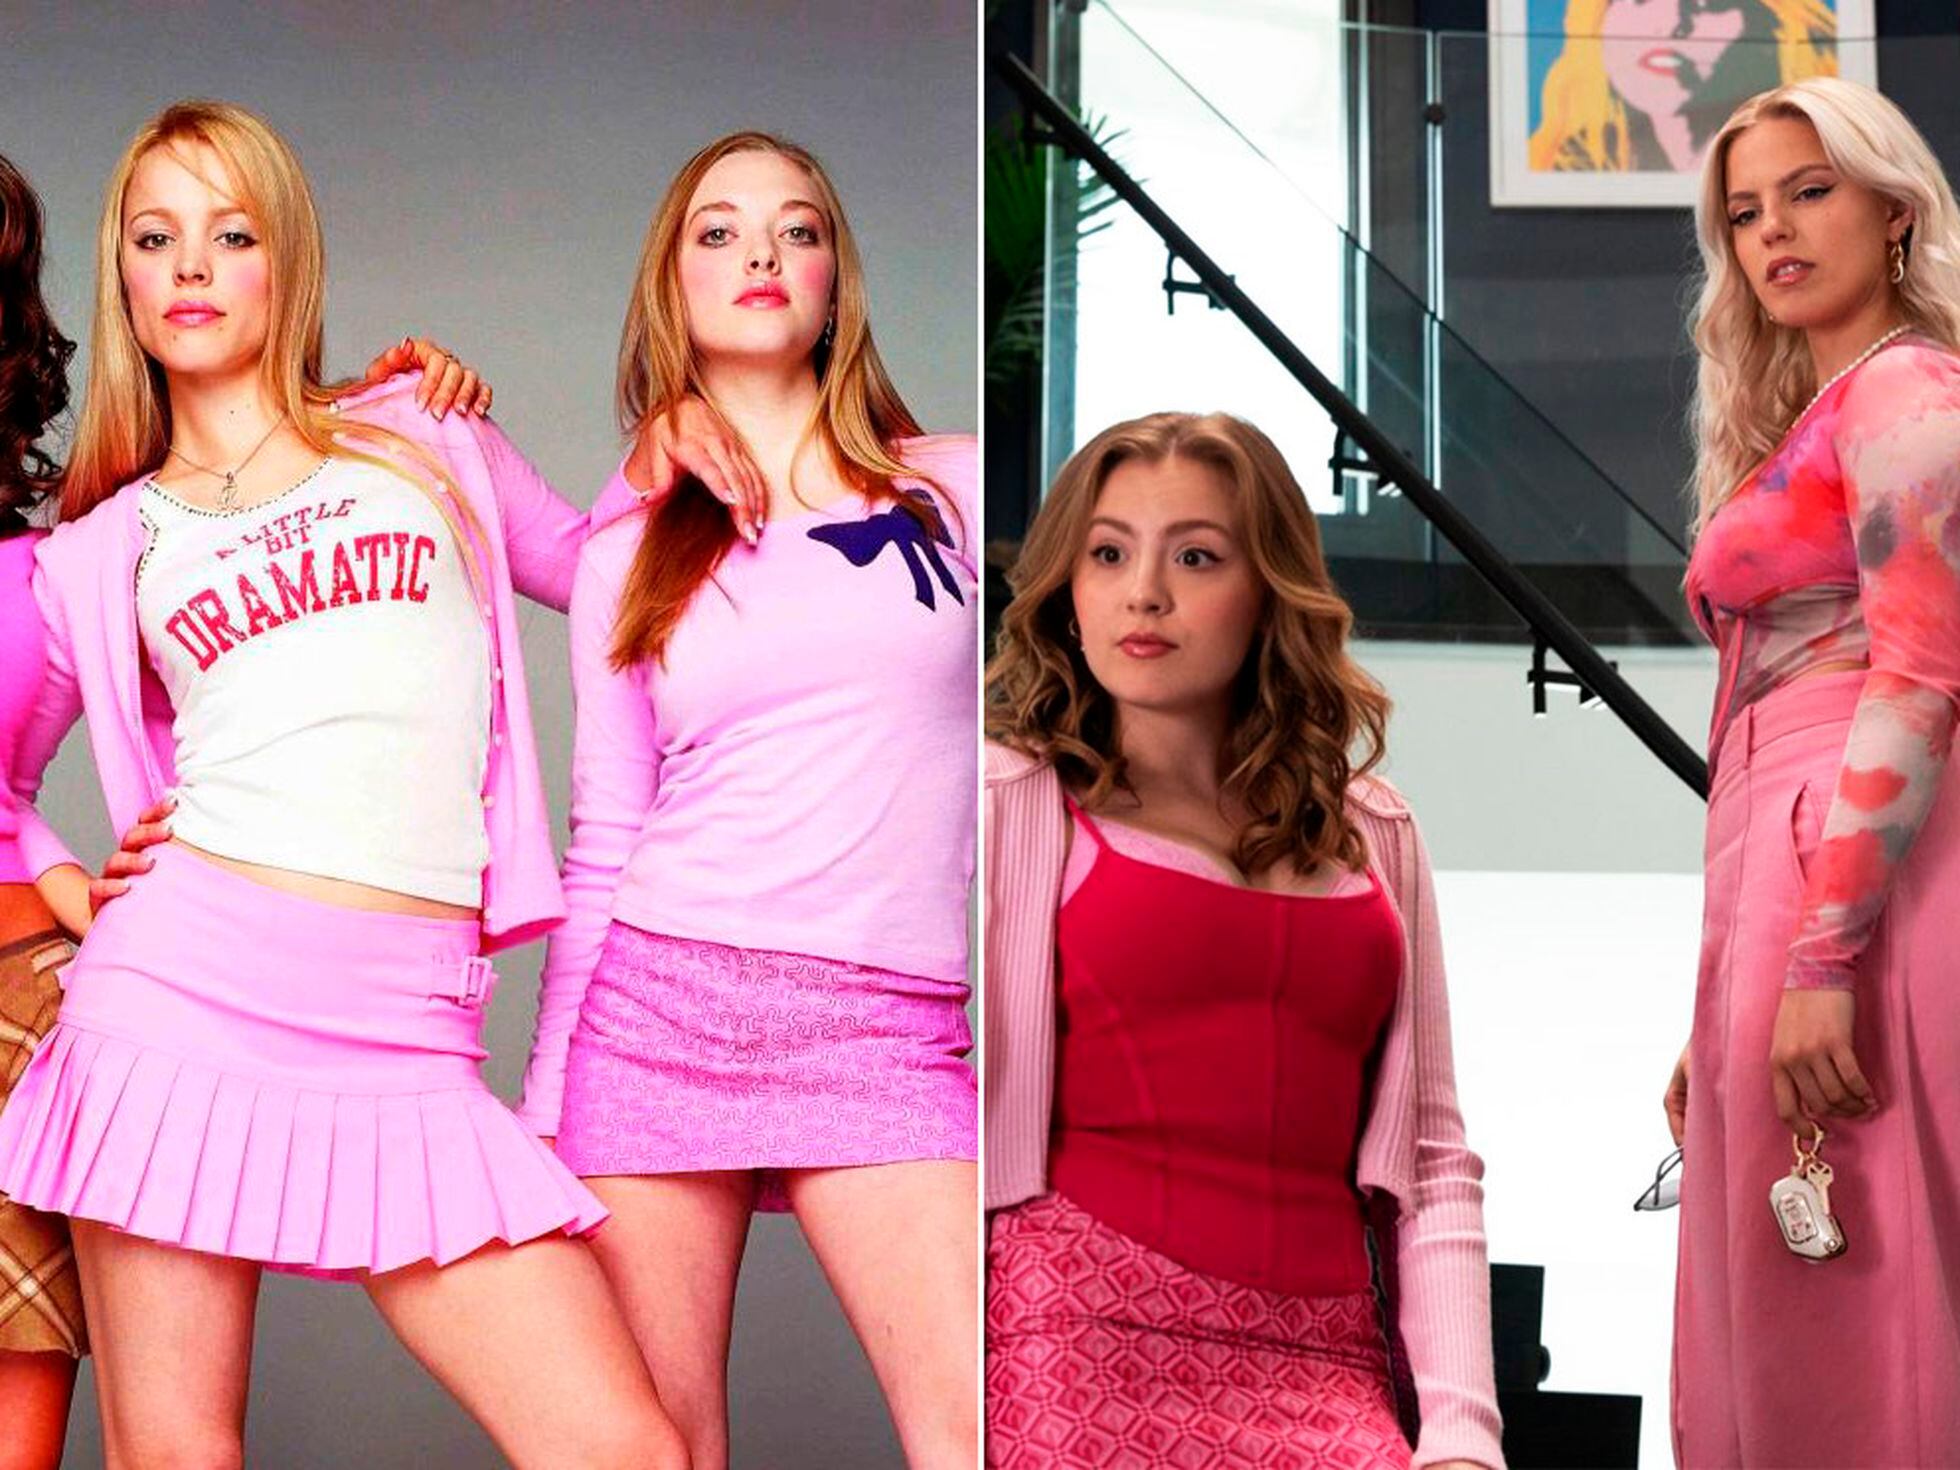 Mean Girls,' 20 years later: The villain's triumph, Culture